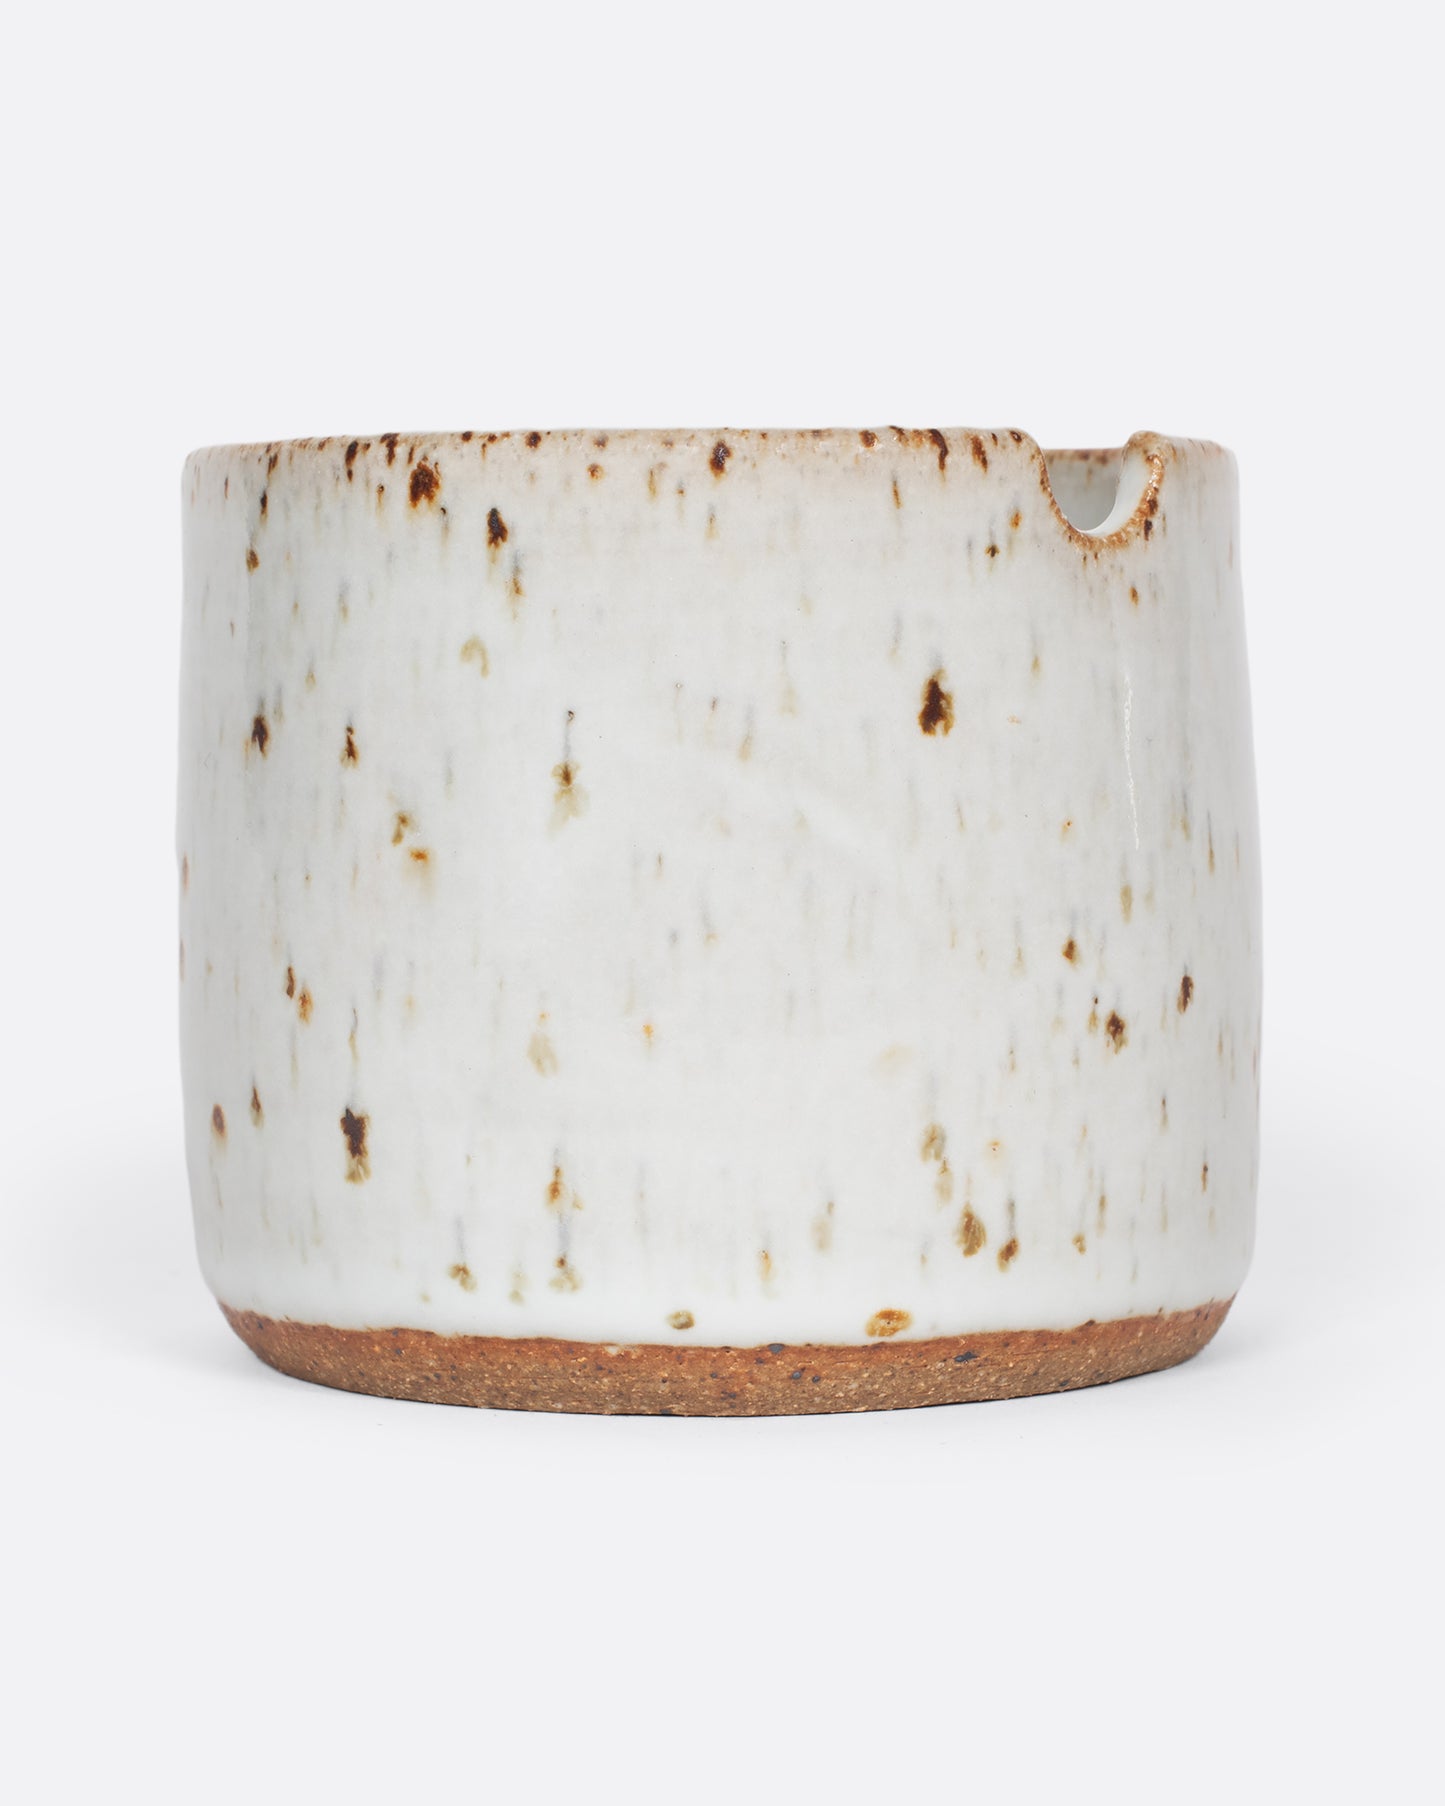 A side view photo of a ceramic paint cup.